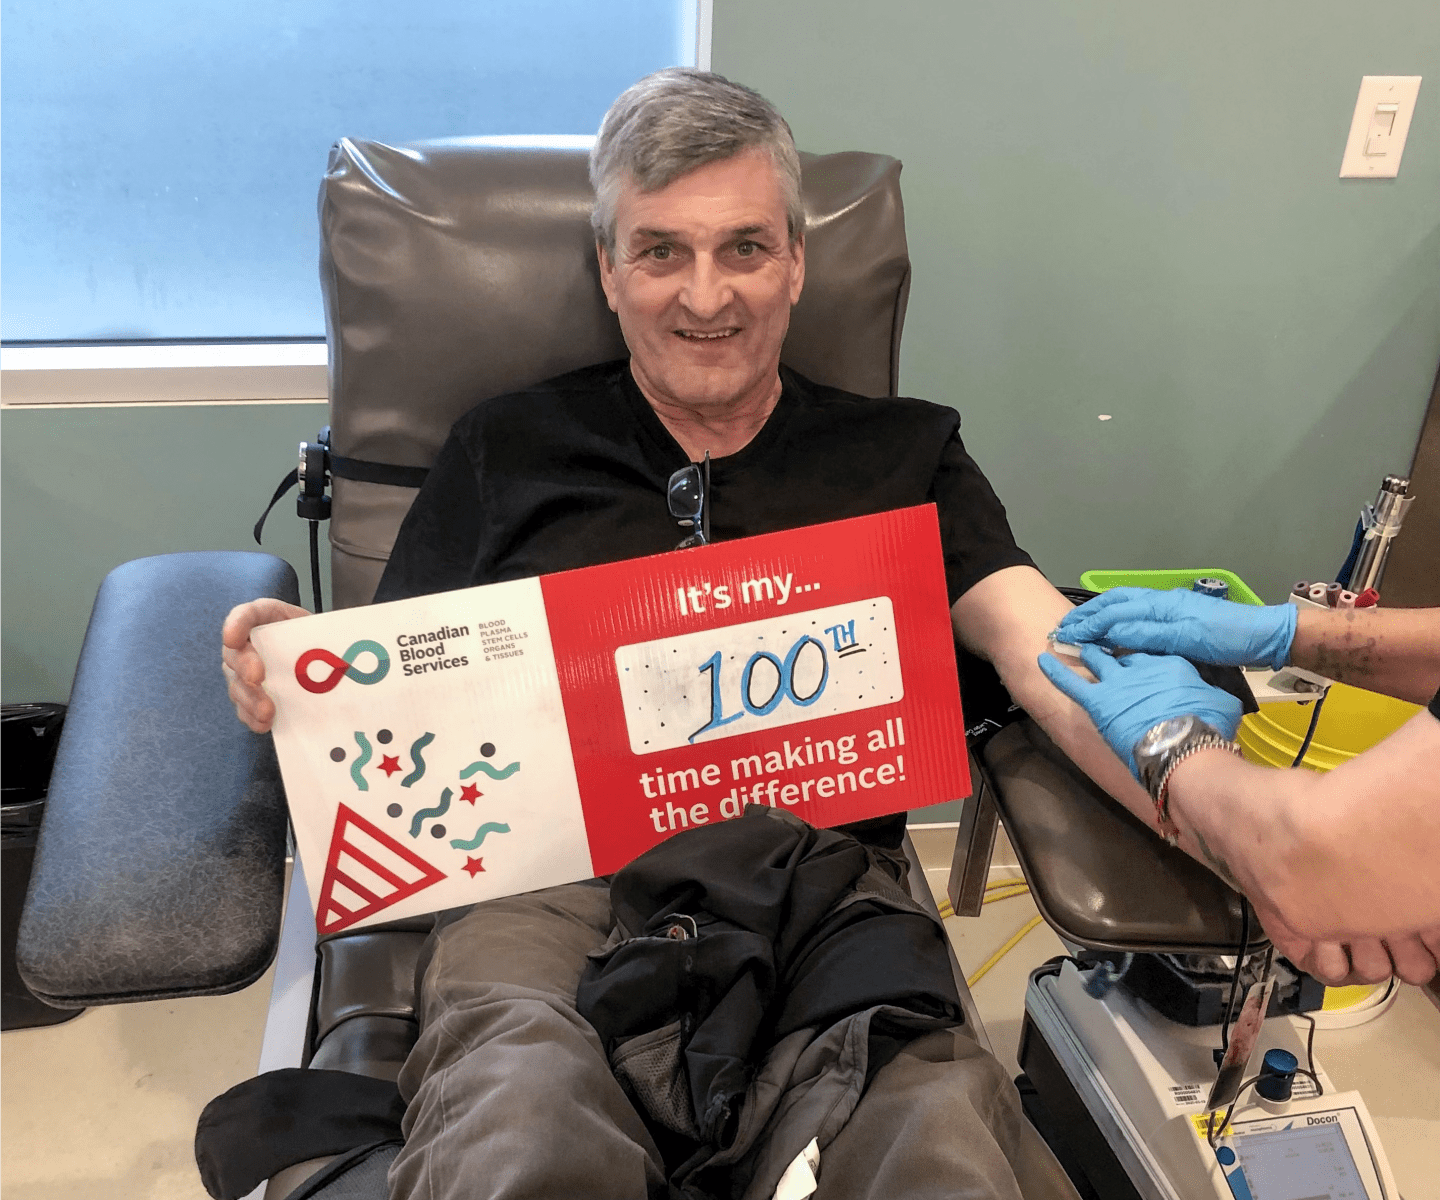 Blood donor in chair with sign that says "It's my 100th time making all the difference"